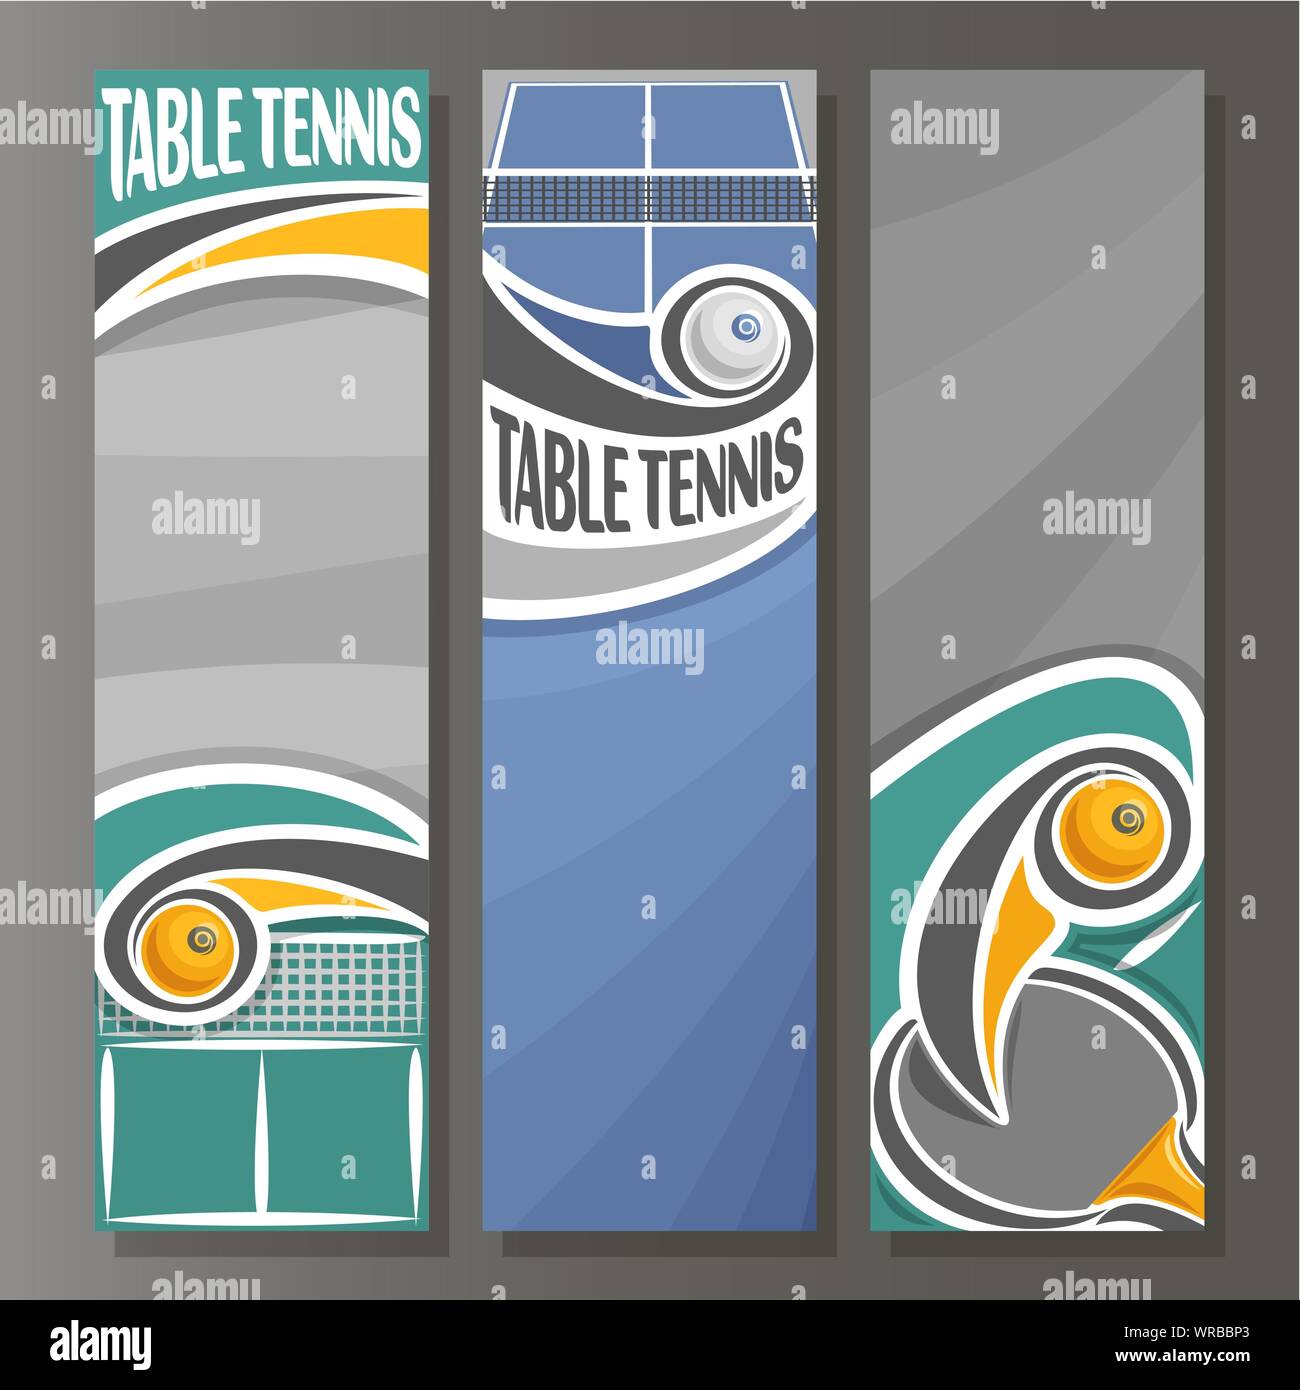 Vector set of vertical banners for Table Tennis: 3 templates for text on table tennis theme, ping pong racket with flying ball above net on grey backg Stock Vector